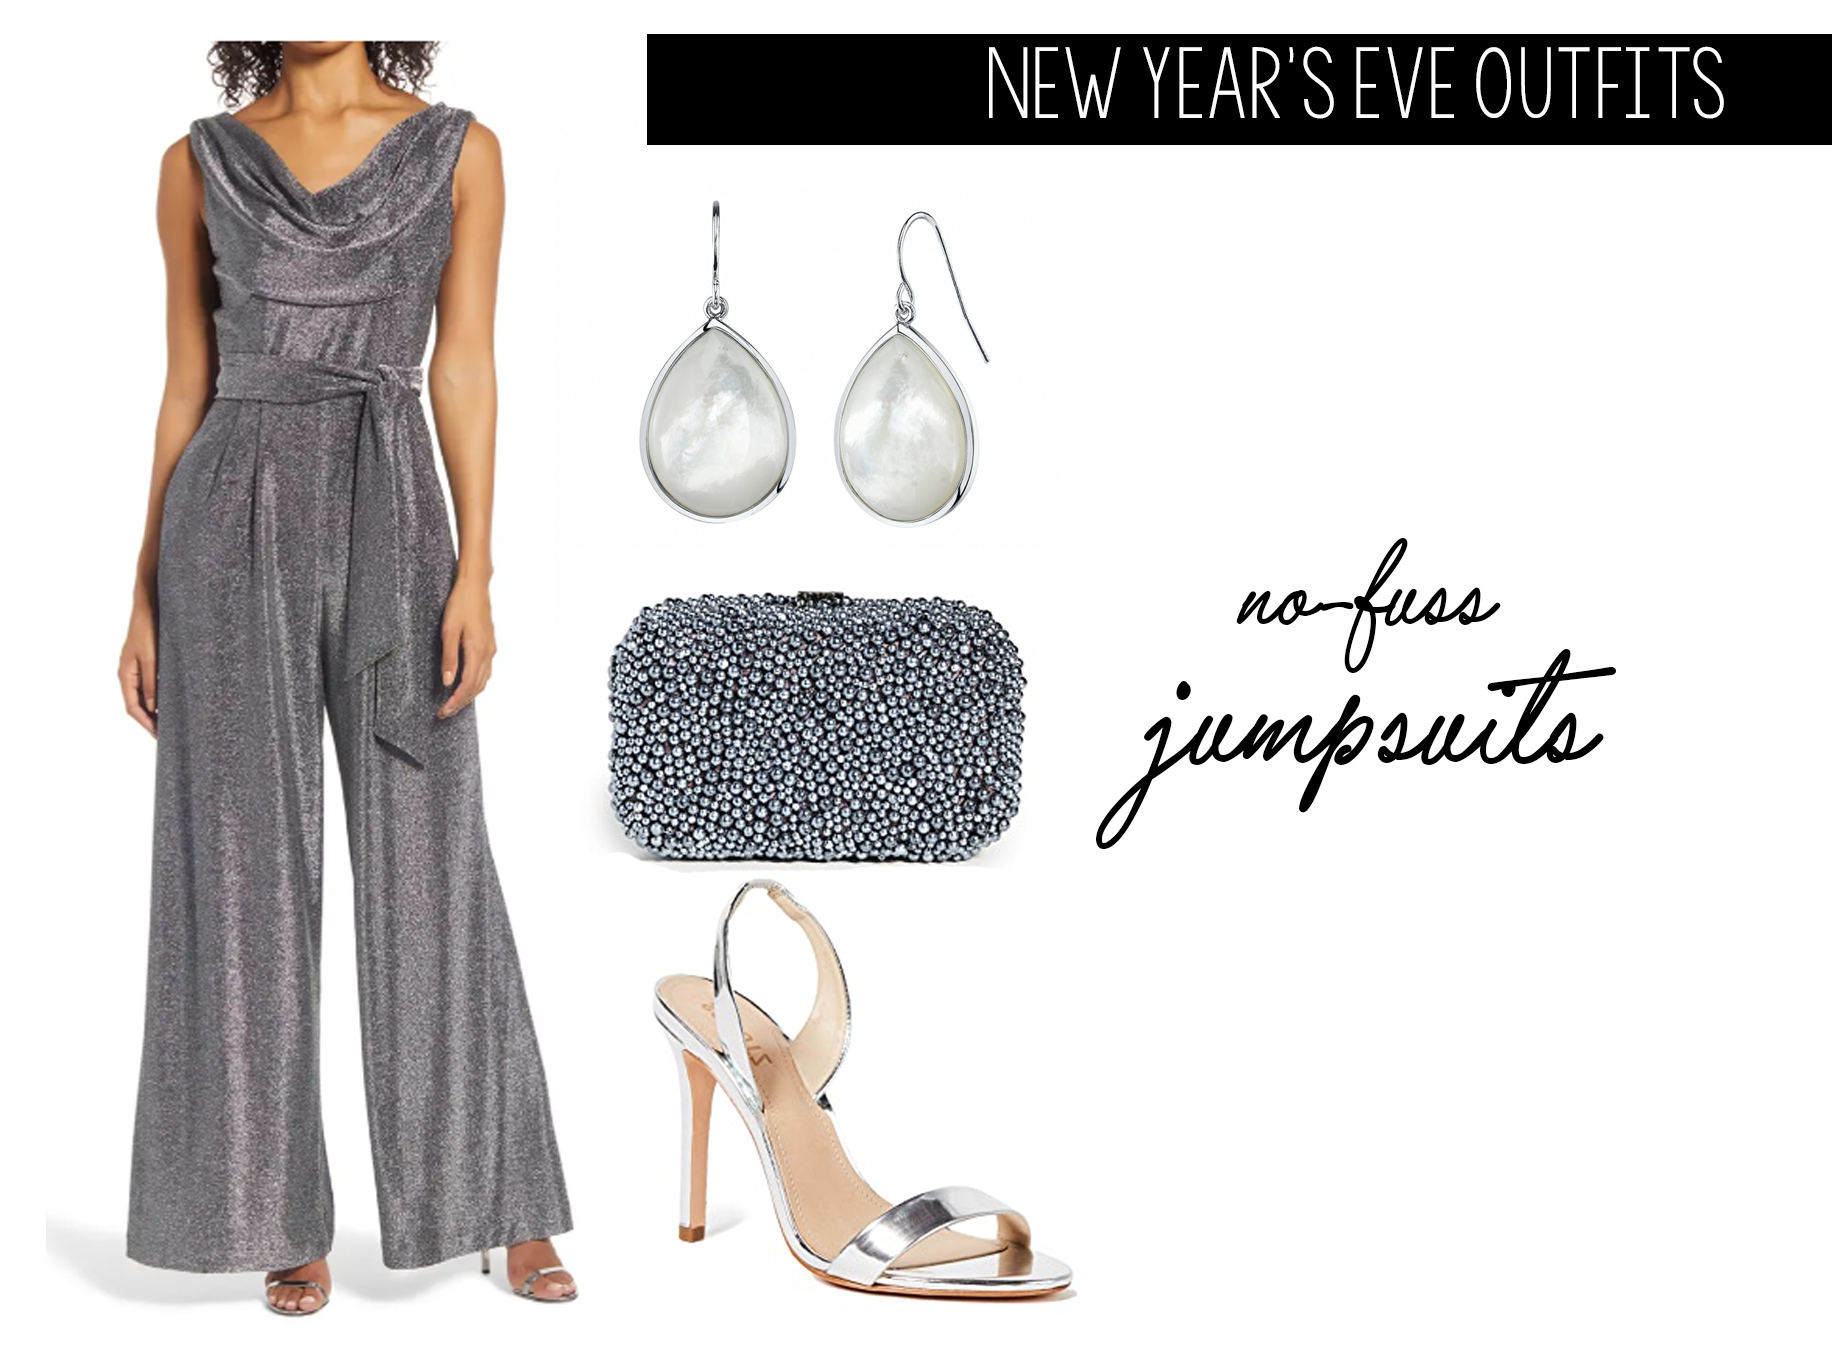 25 Best New Years Eve Outfit Ideas Sure to Dazzle